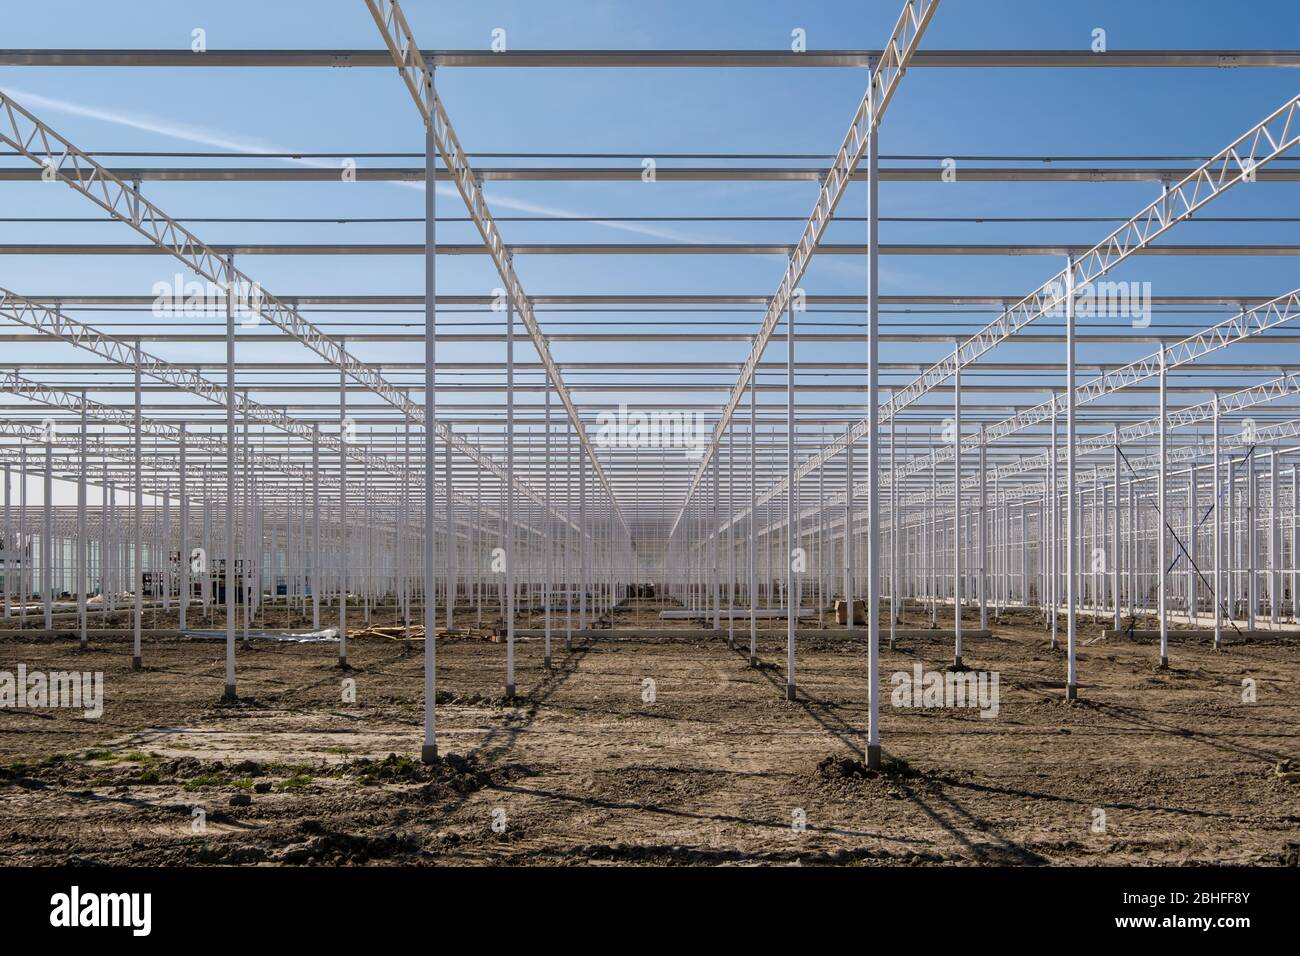 Perspective view on the framework of an industrial glass greenhouse under construction in the Netherlands. Stock Photo